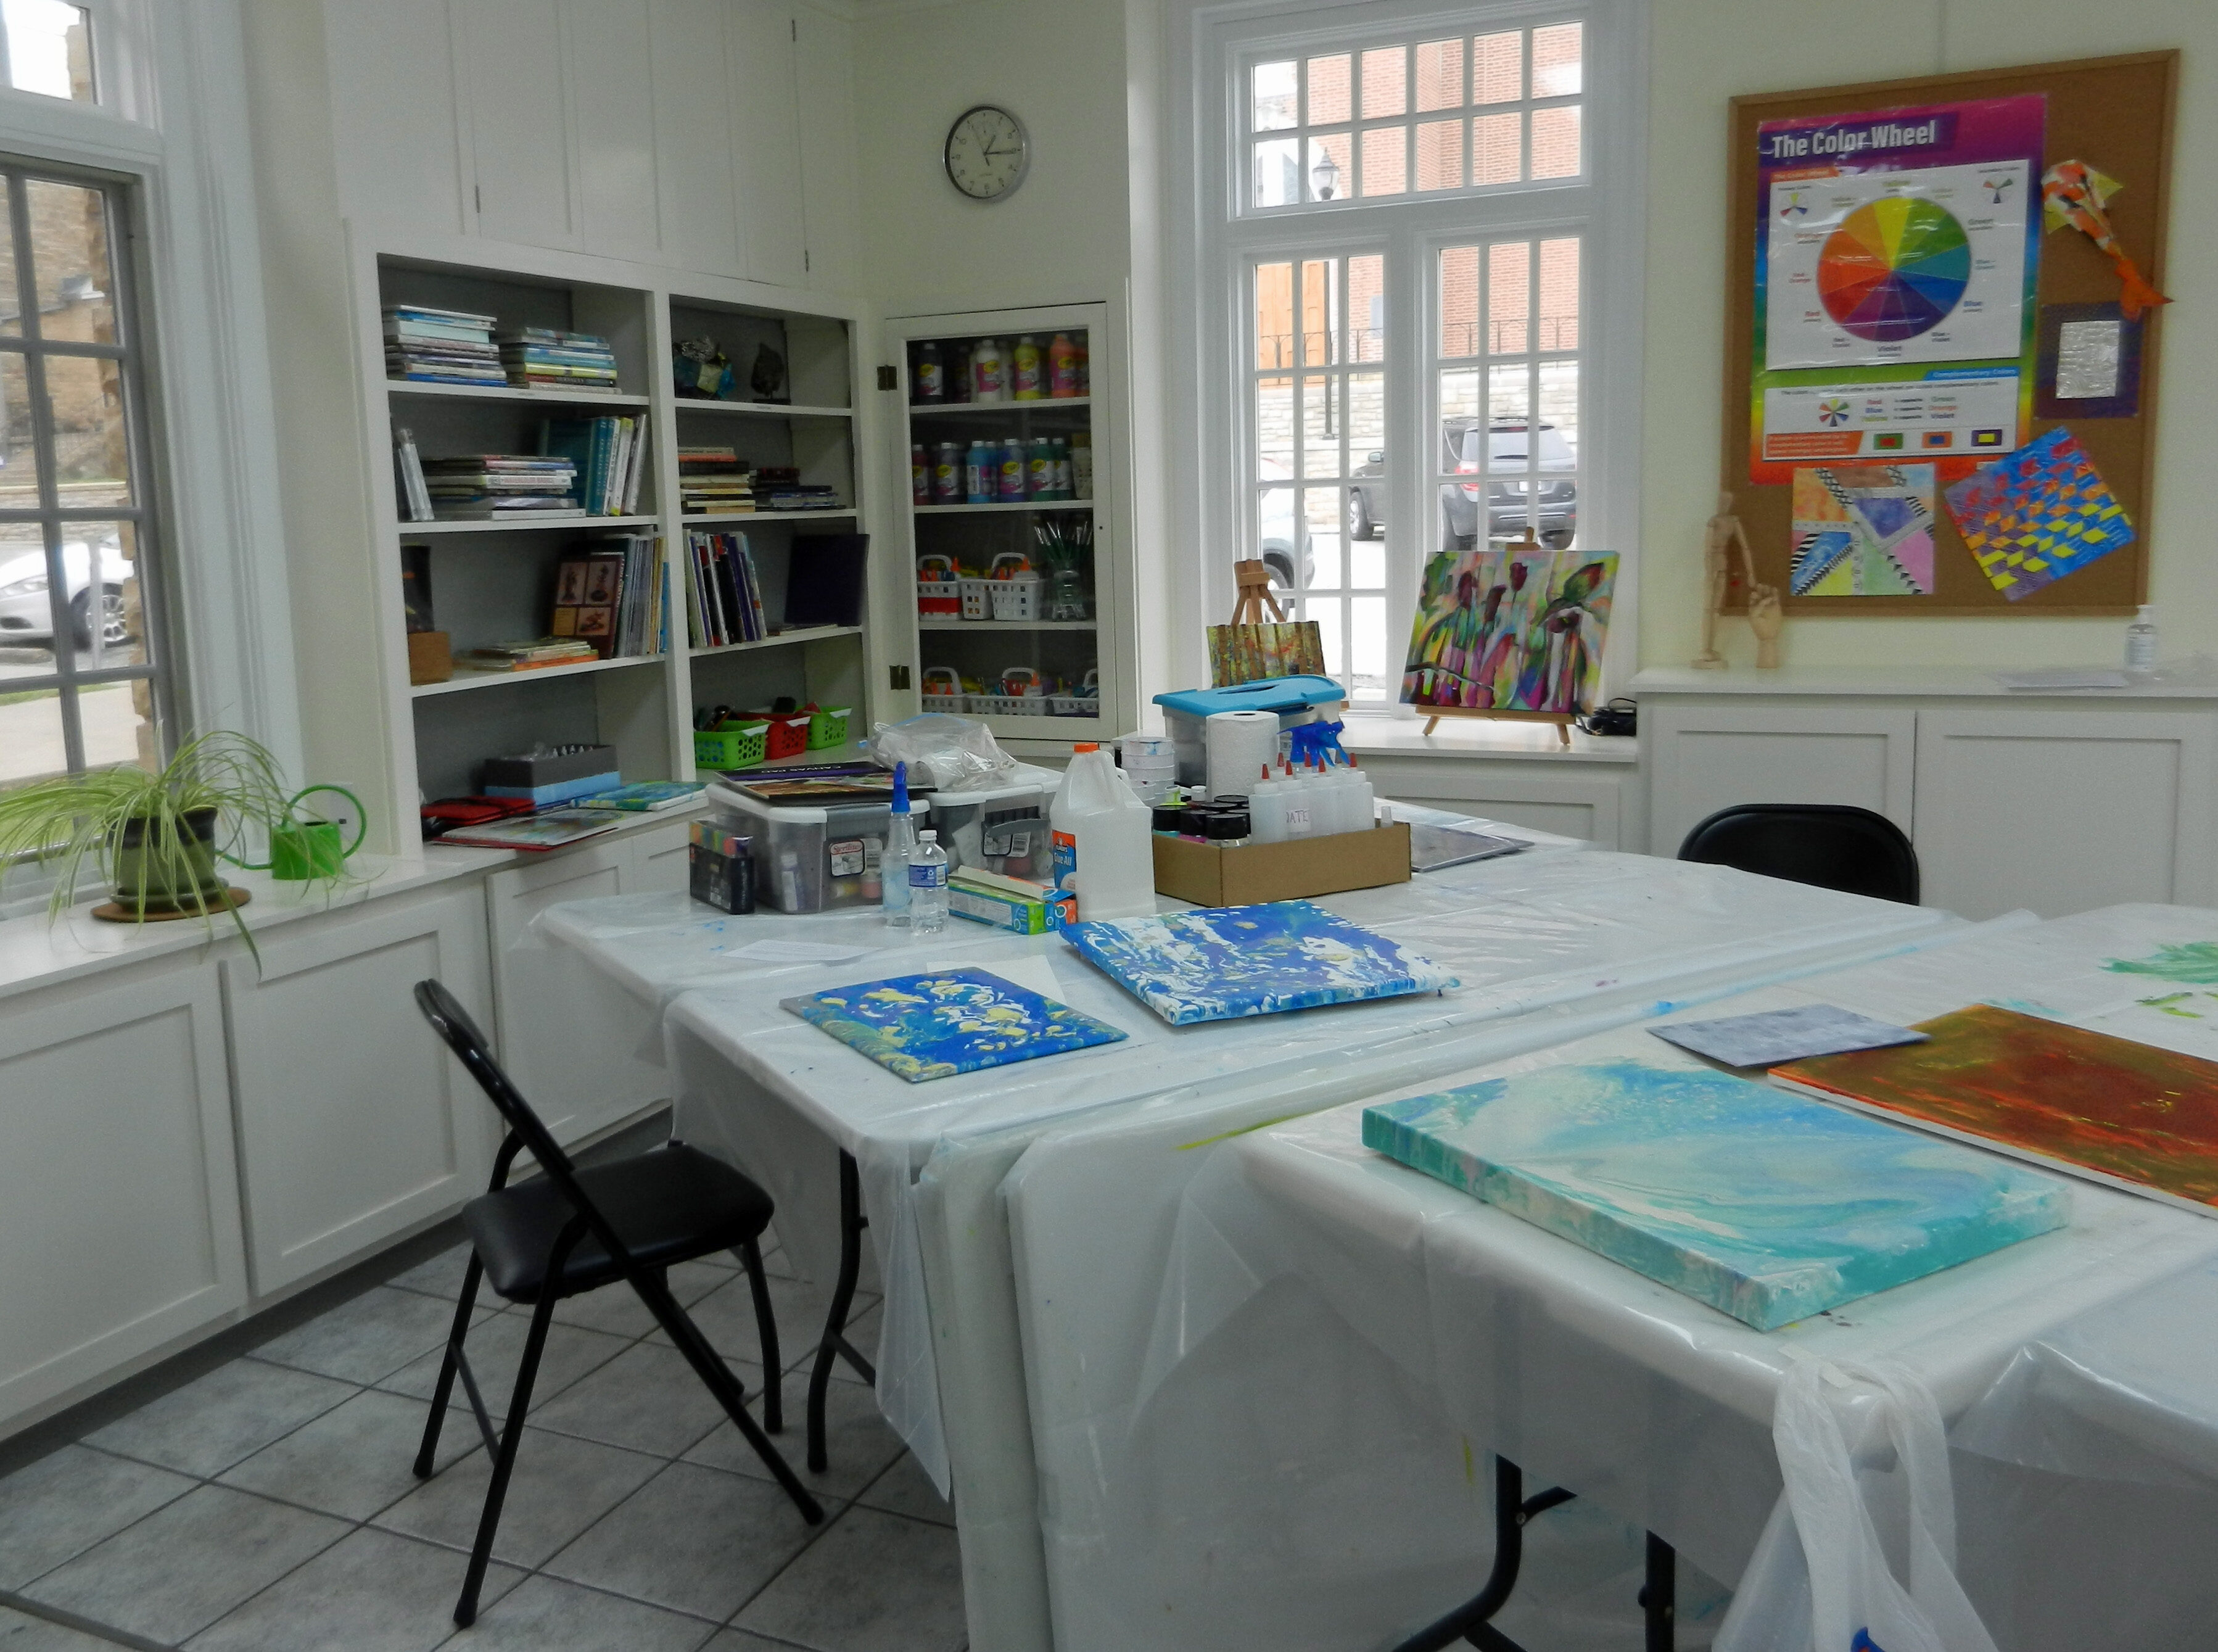 Workshop and Classroom Area